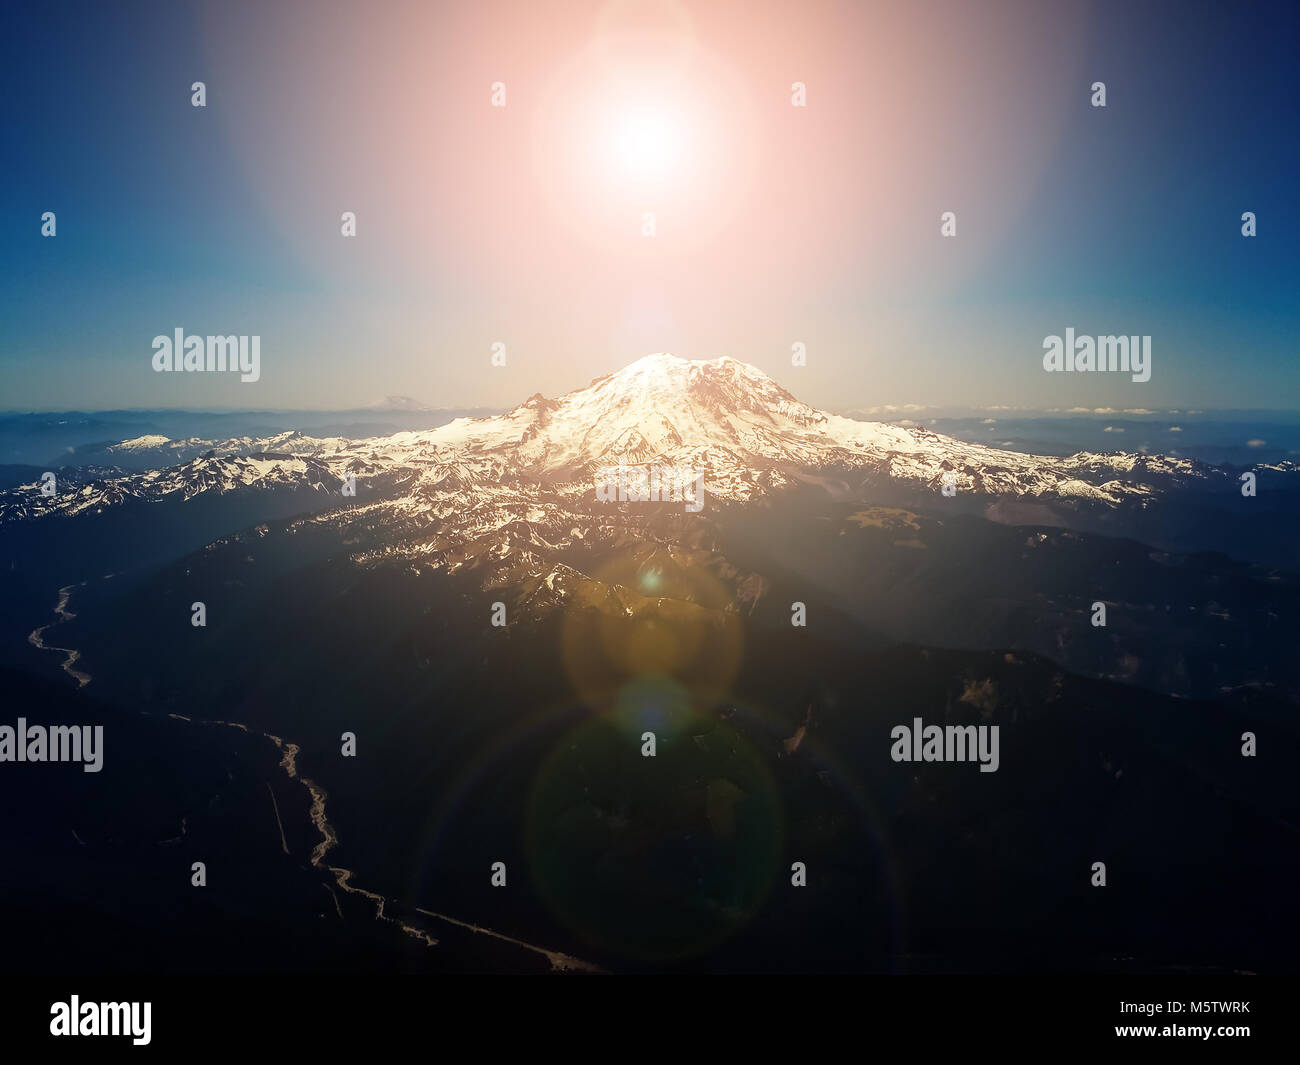 Bright sun in sky above mountain peak - aerial overhead view Stock Photo